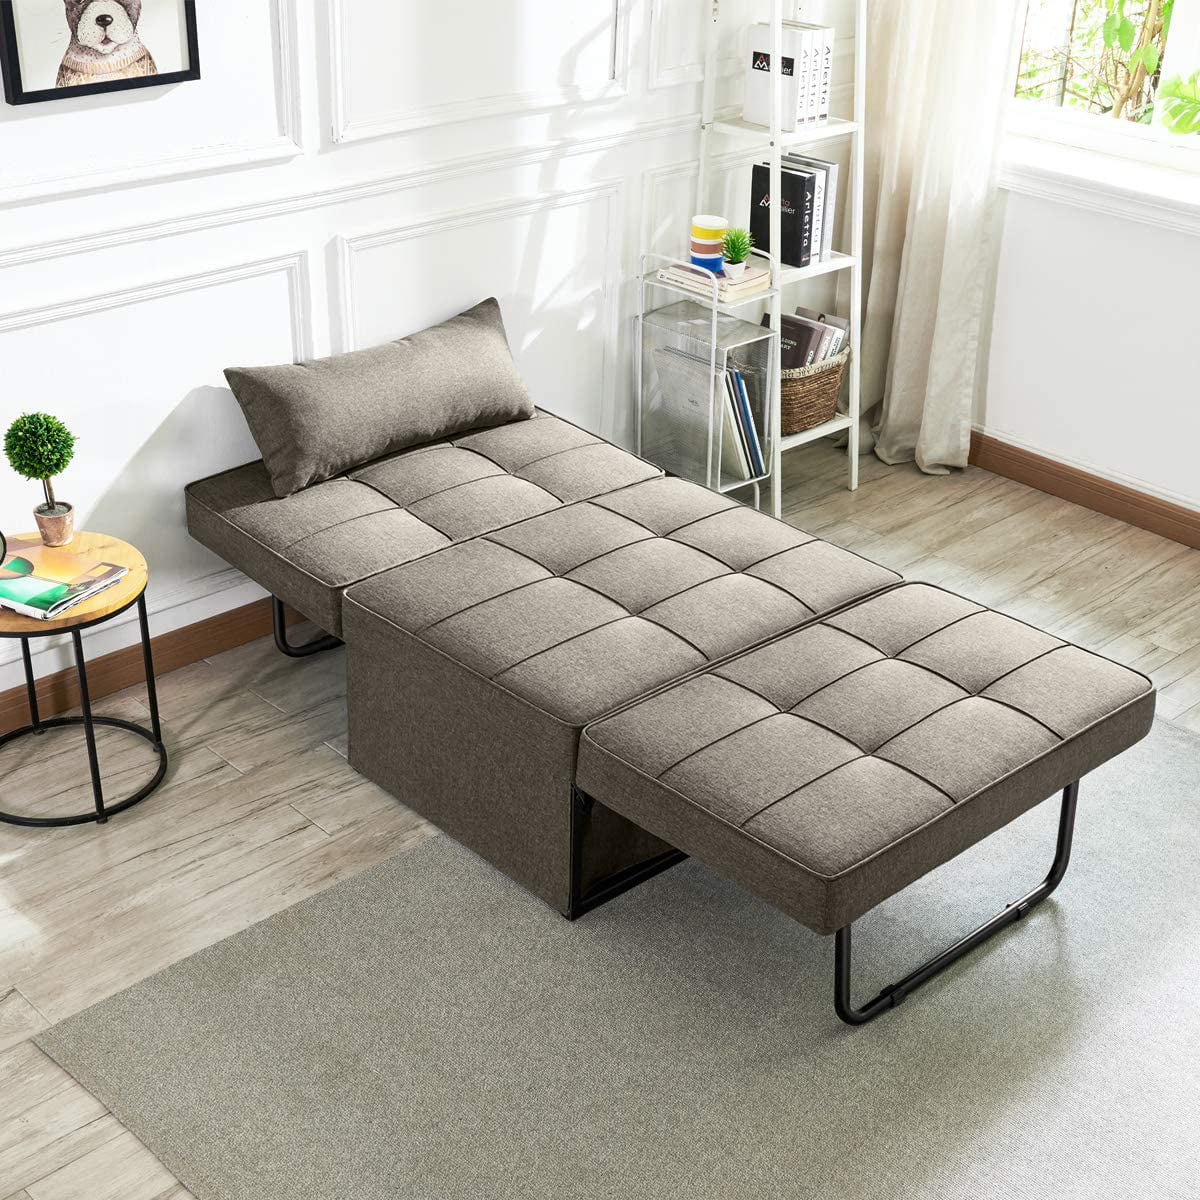 Vonanda Sofa Bed Convertible Chair 4, Sofa Bed Convertible Chair 4 In 1